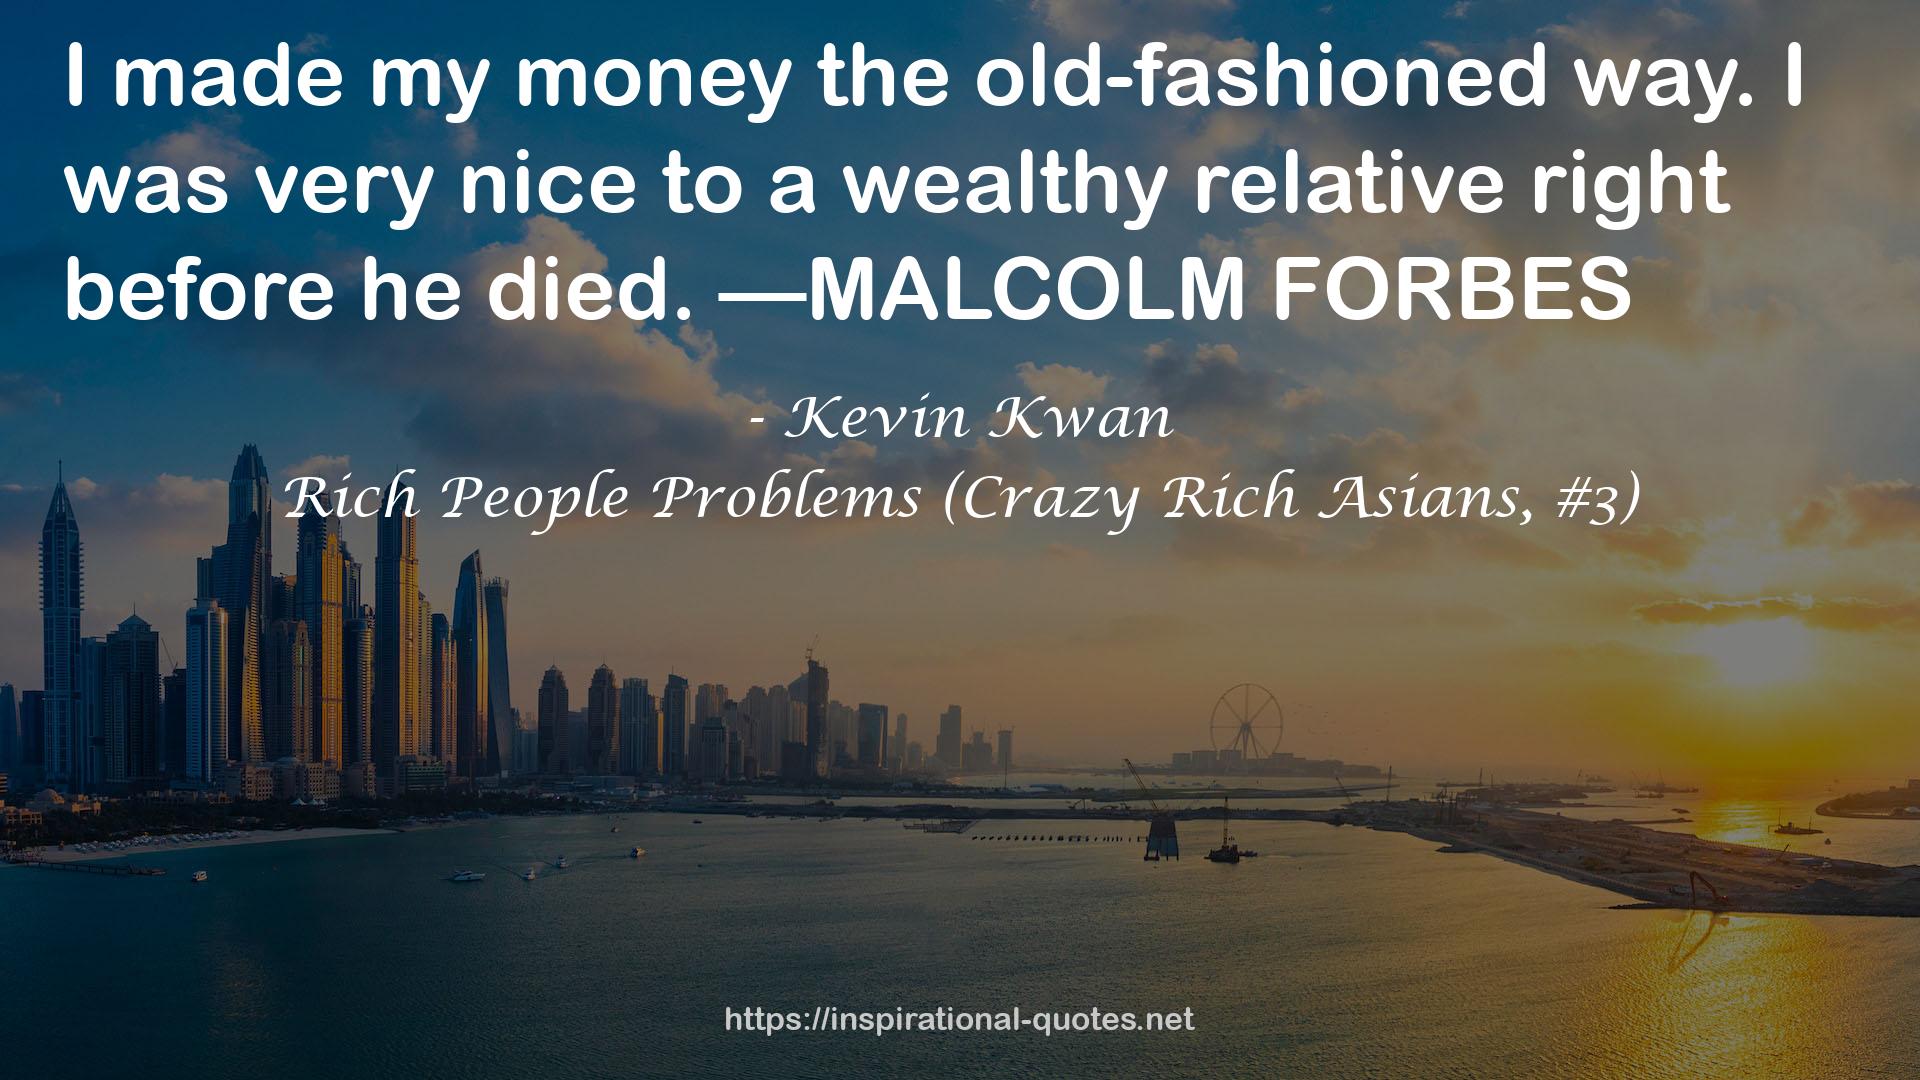 Kevin Kwan QUOTES